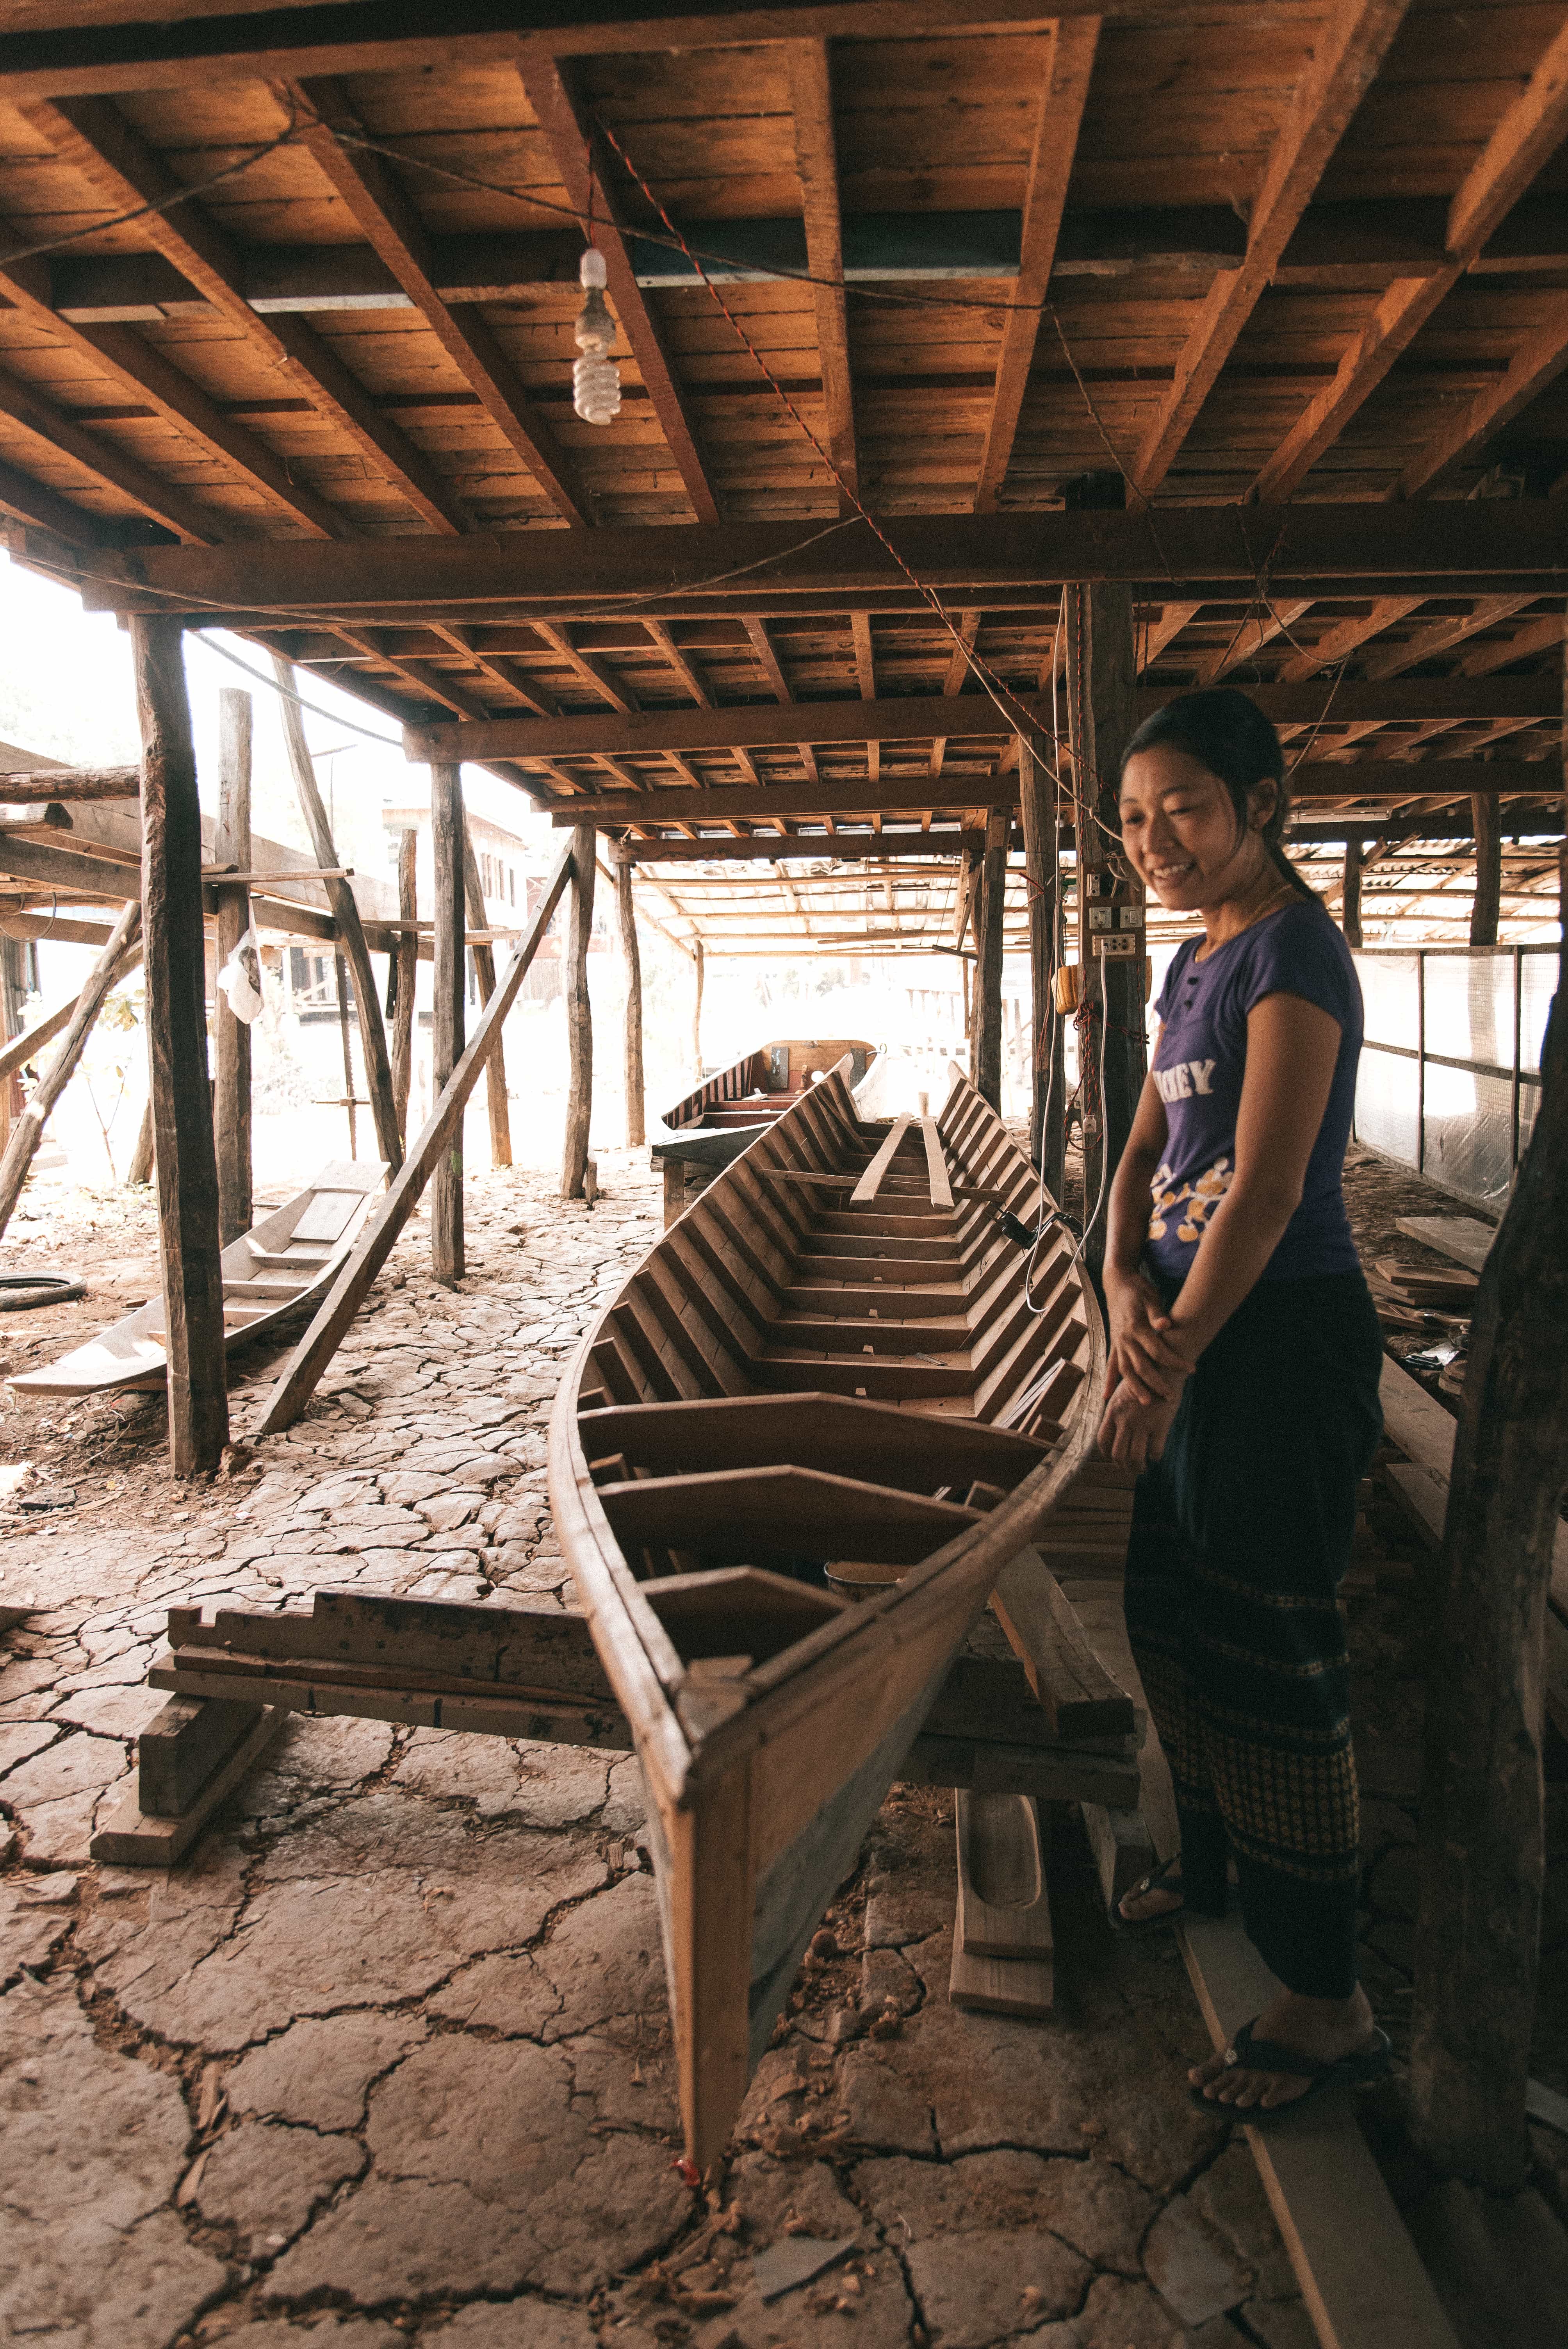 Things to do in Inle Lake, Inle Lake travel guide, teak and wook and cigarrettes